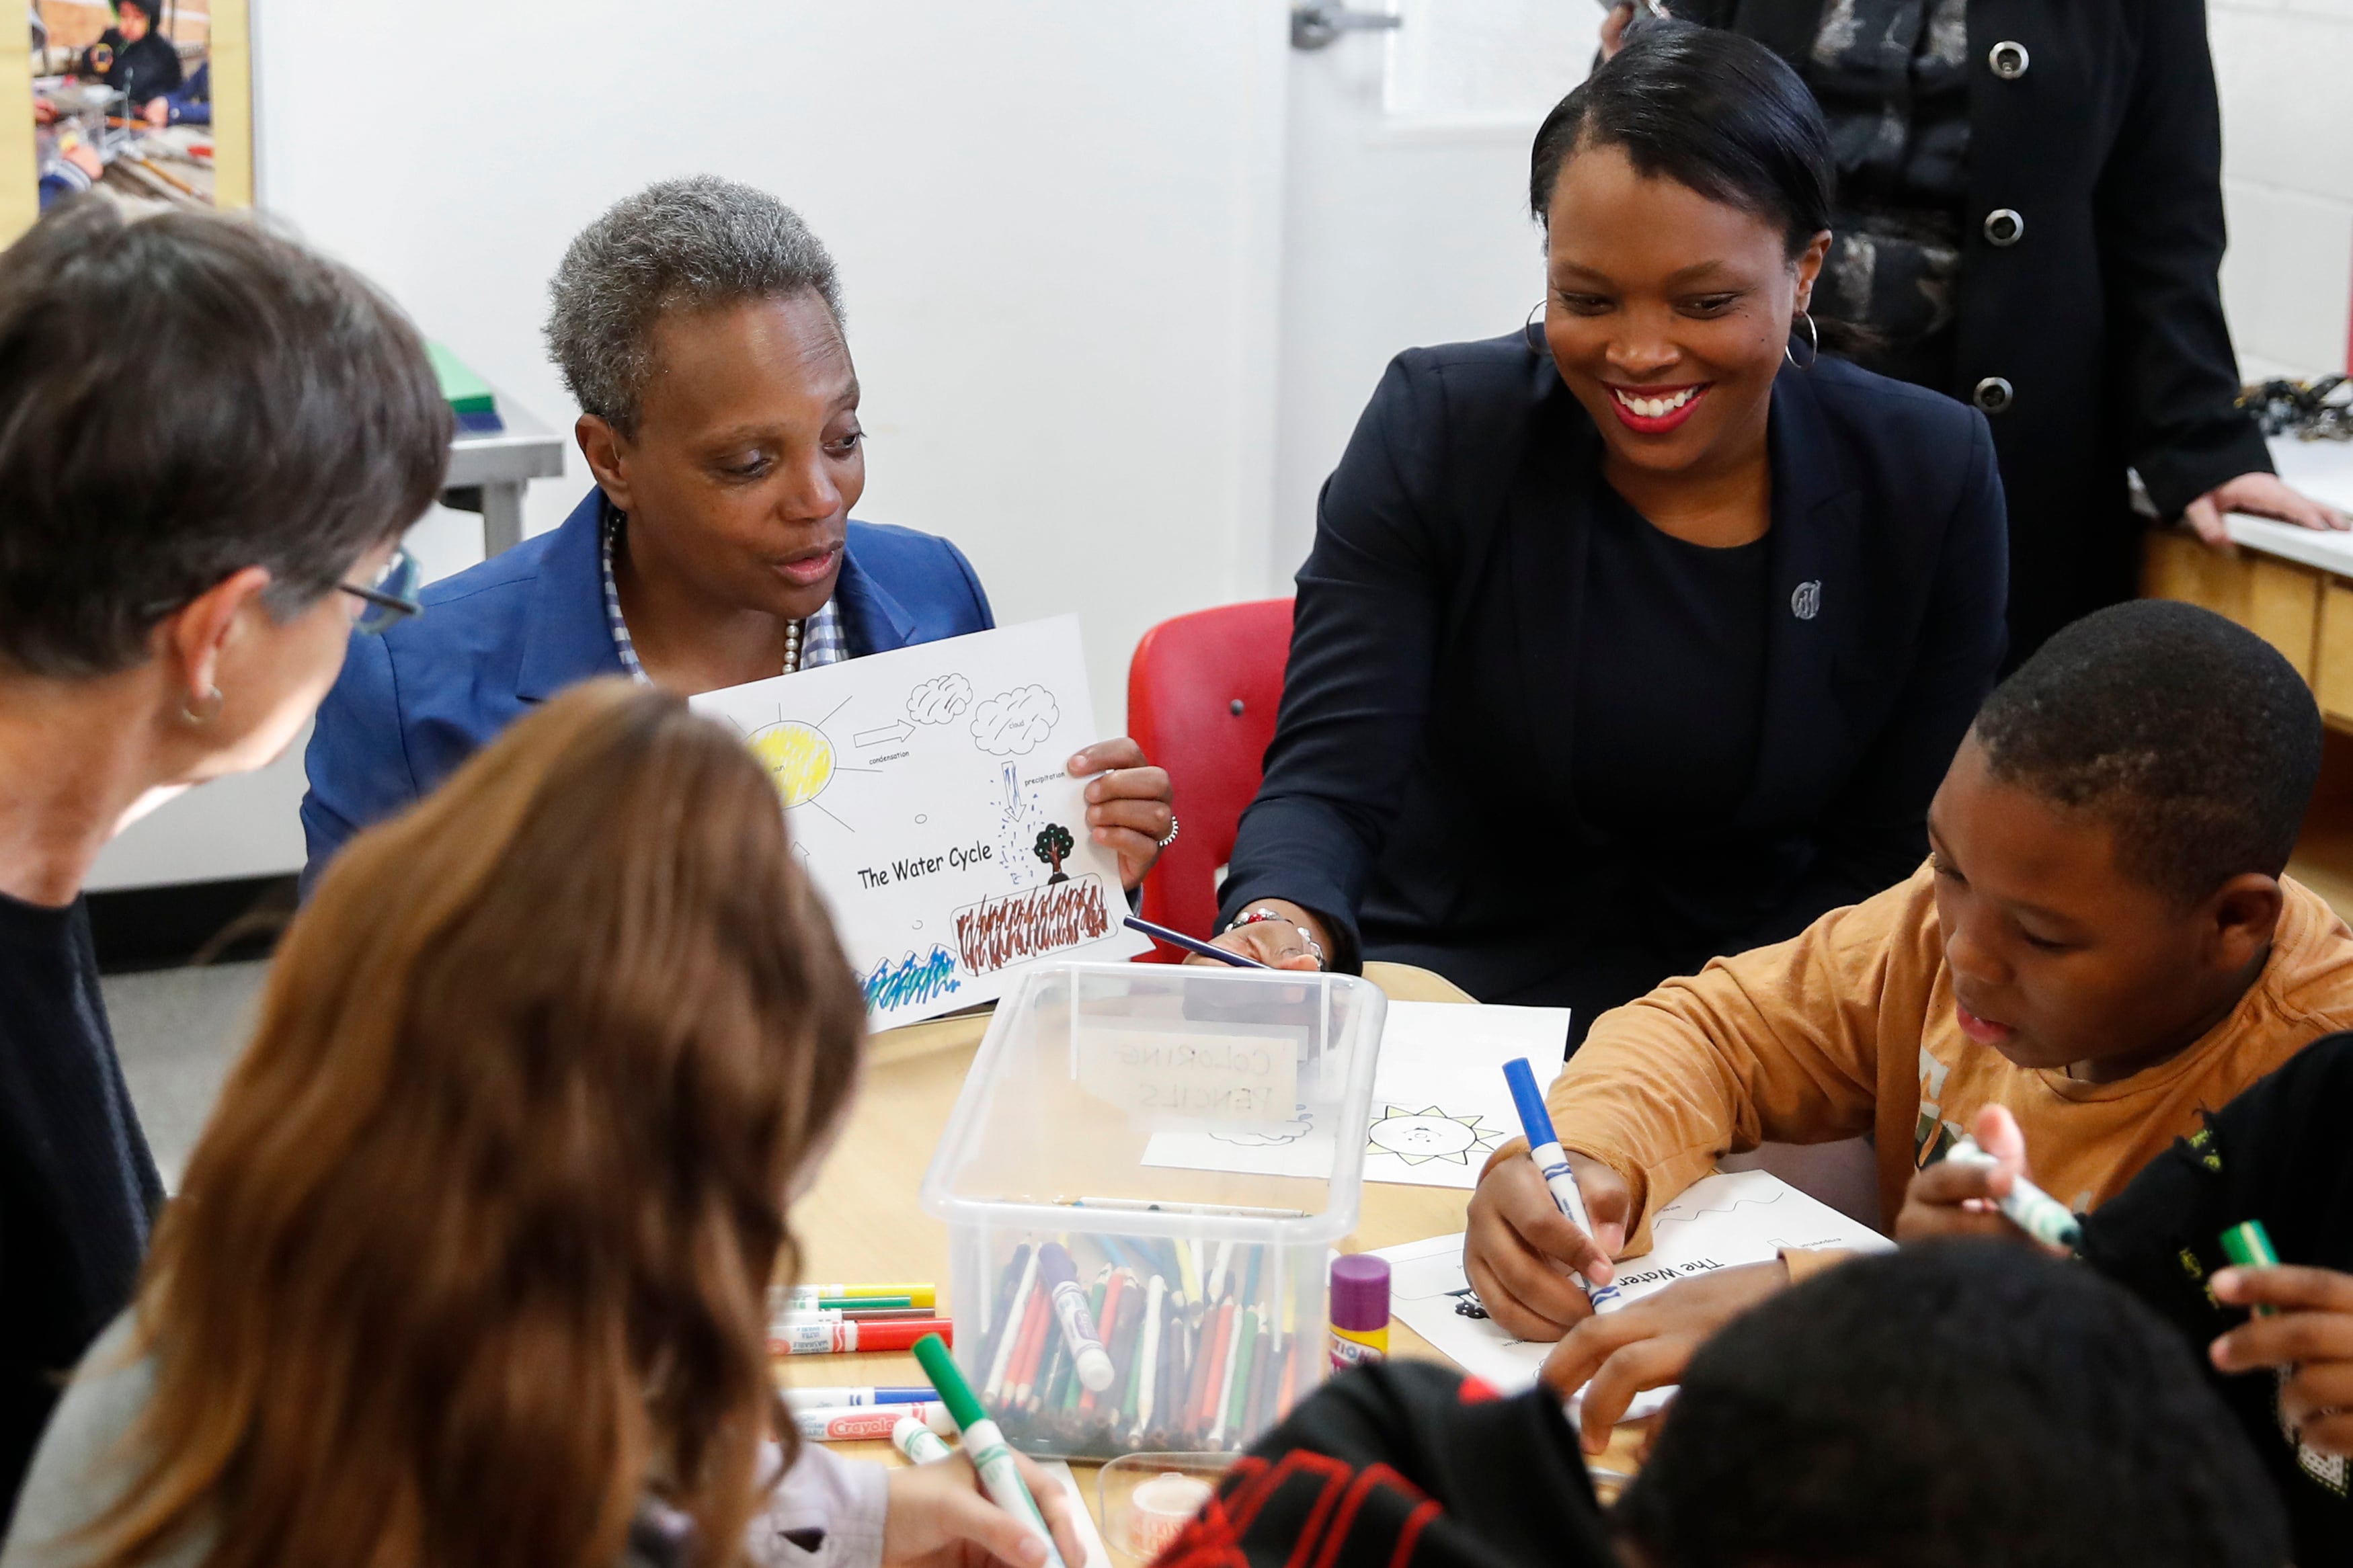 Janice Jackson sits next to Mayor Lori Lightfoot at a table with students.